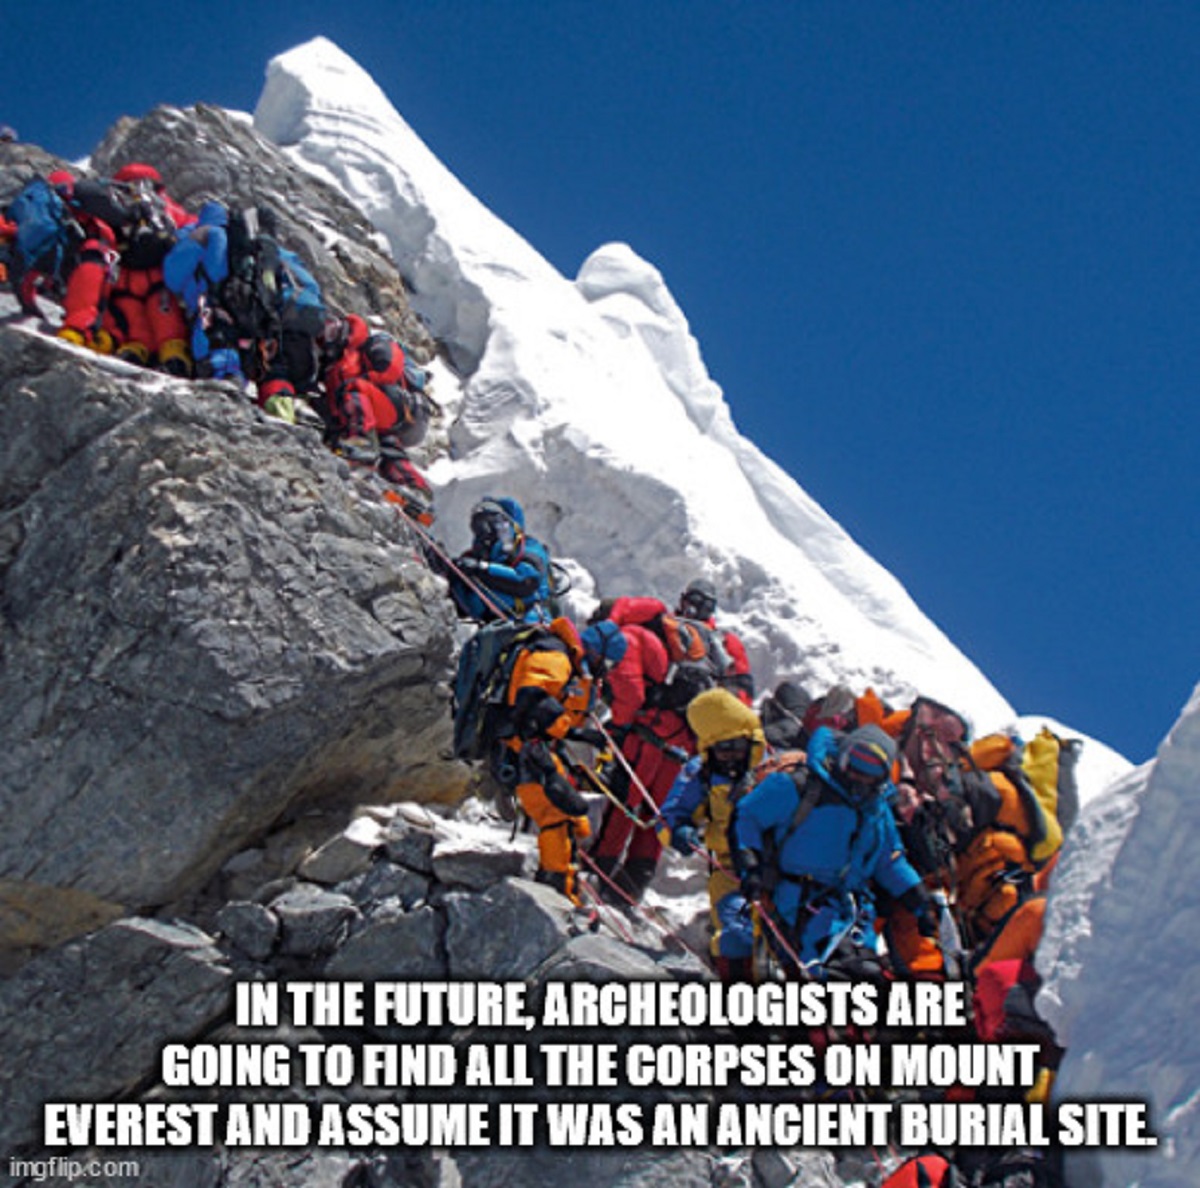 people waiting to climb everest - In The Future, Archeologists Are Going To Find All The Corpses On Mount Everest And Assume It Was An Ancient Burial Site. imgflip.com